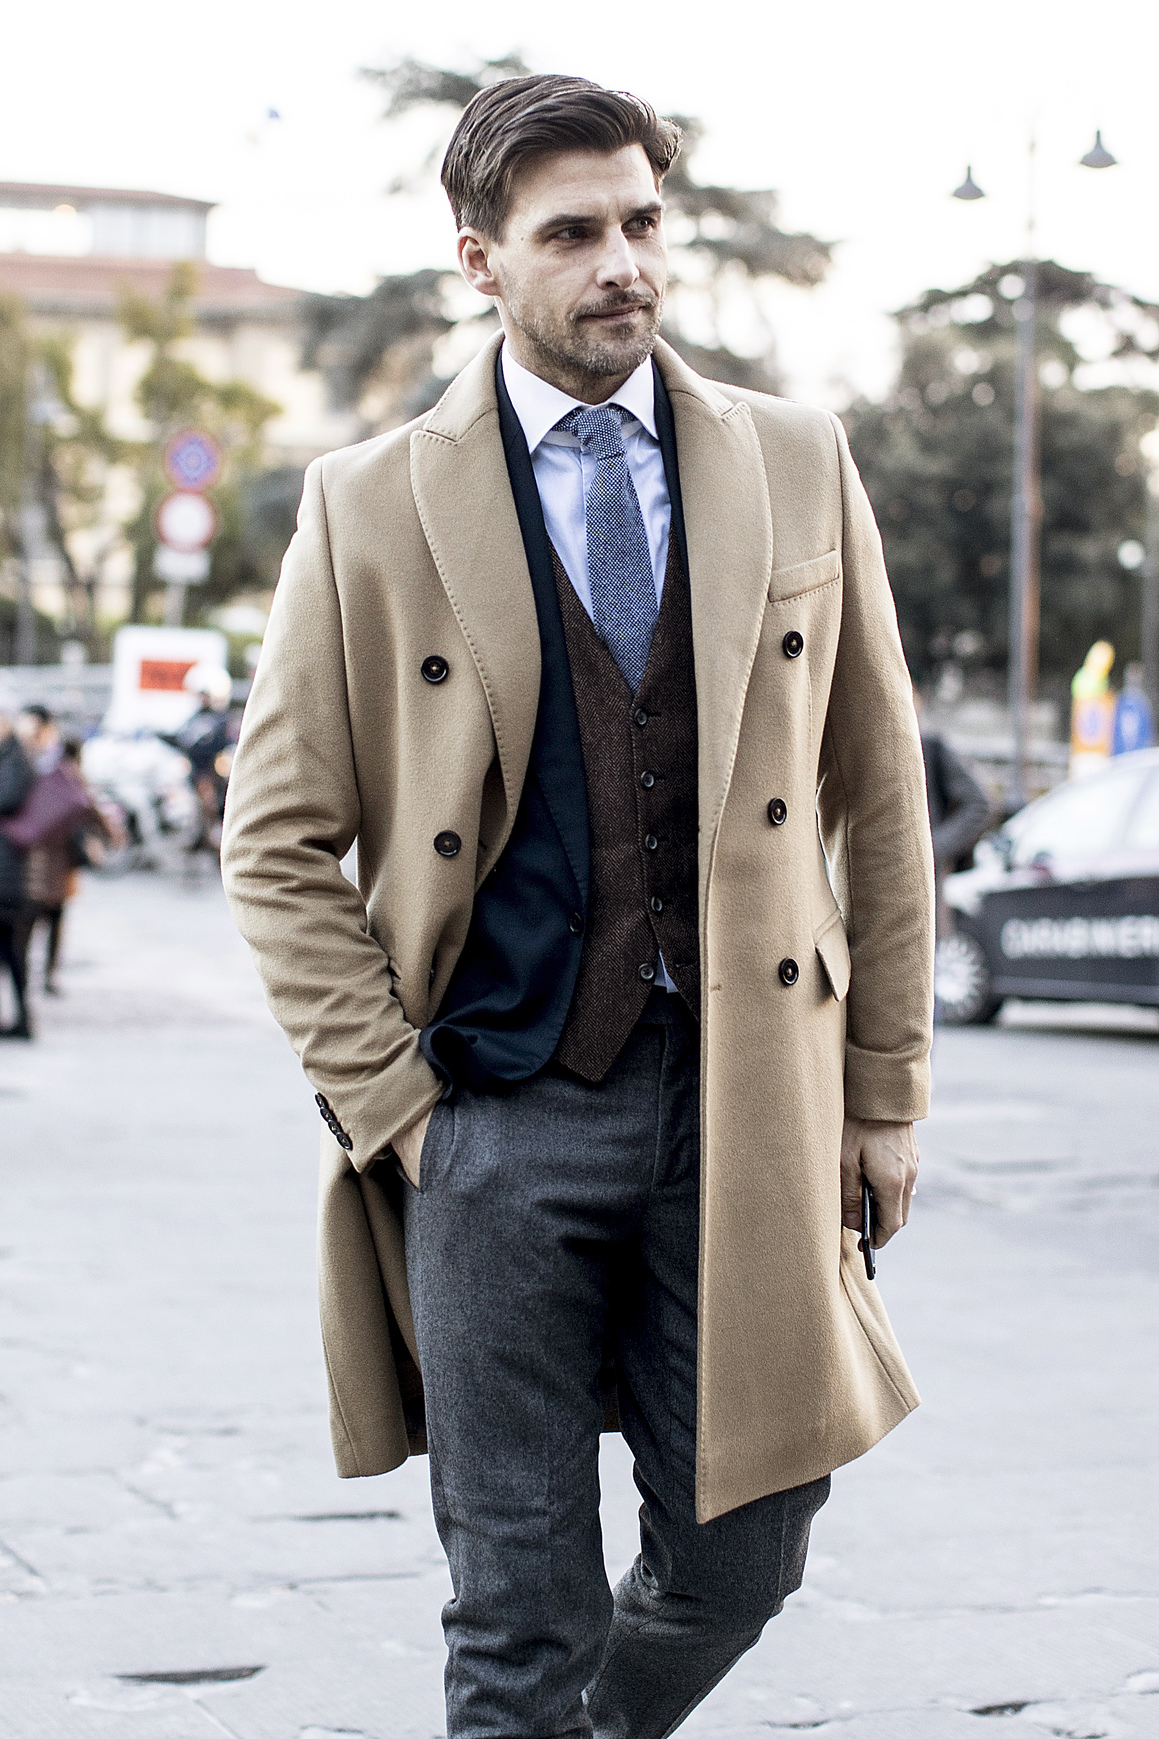 Cold Weather, Stylish Gents